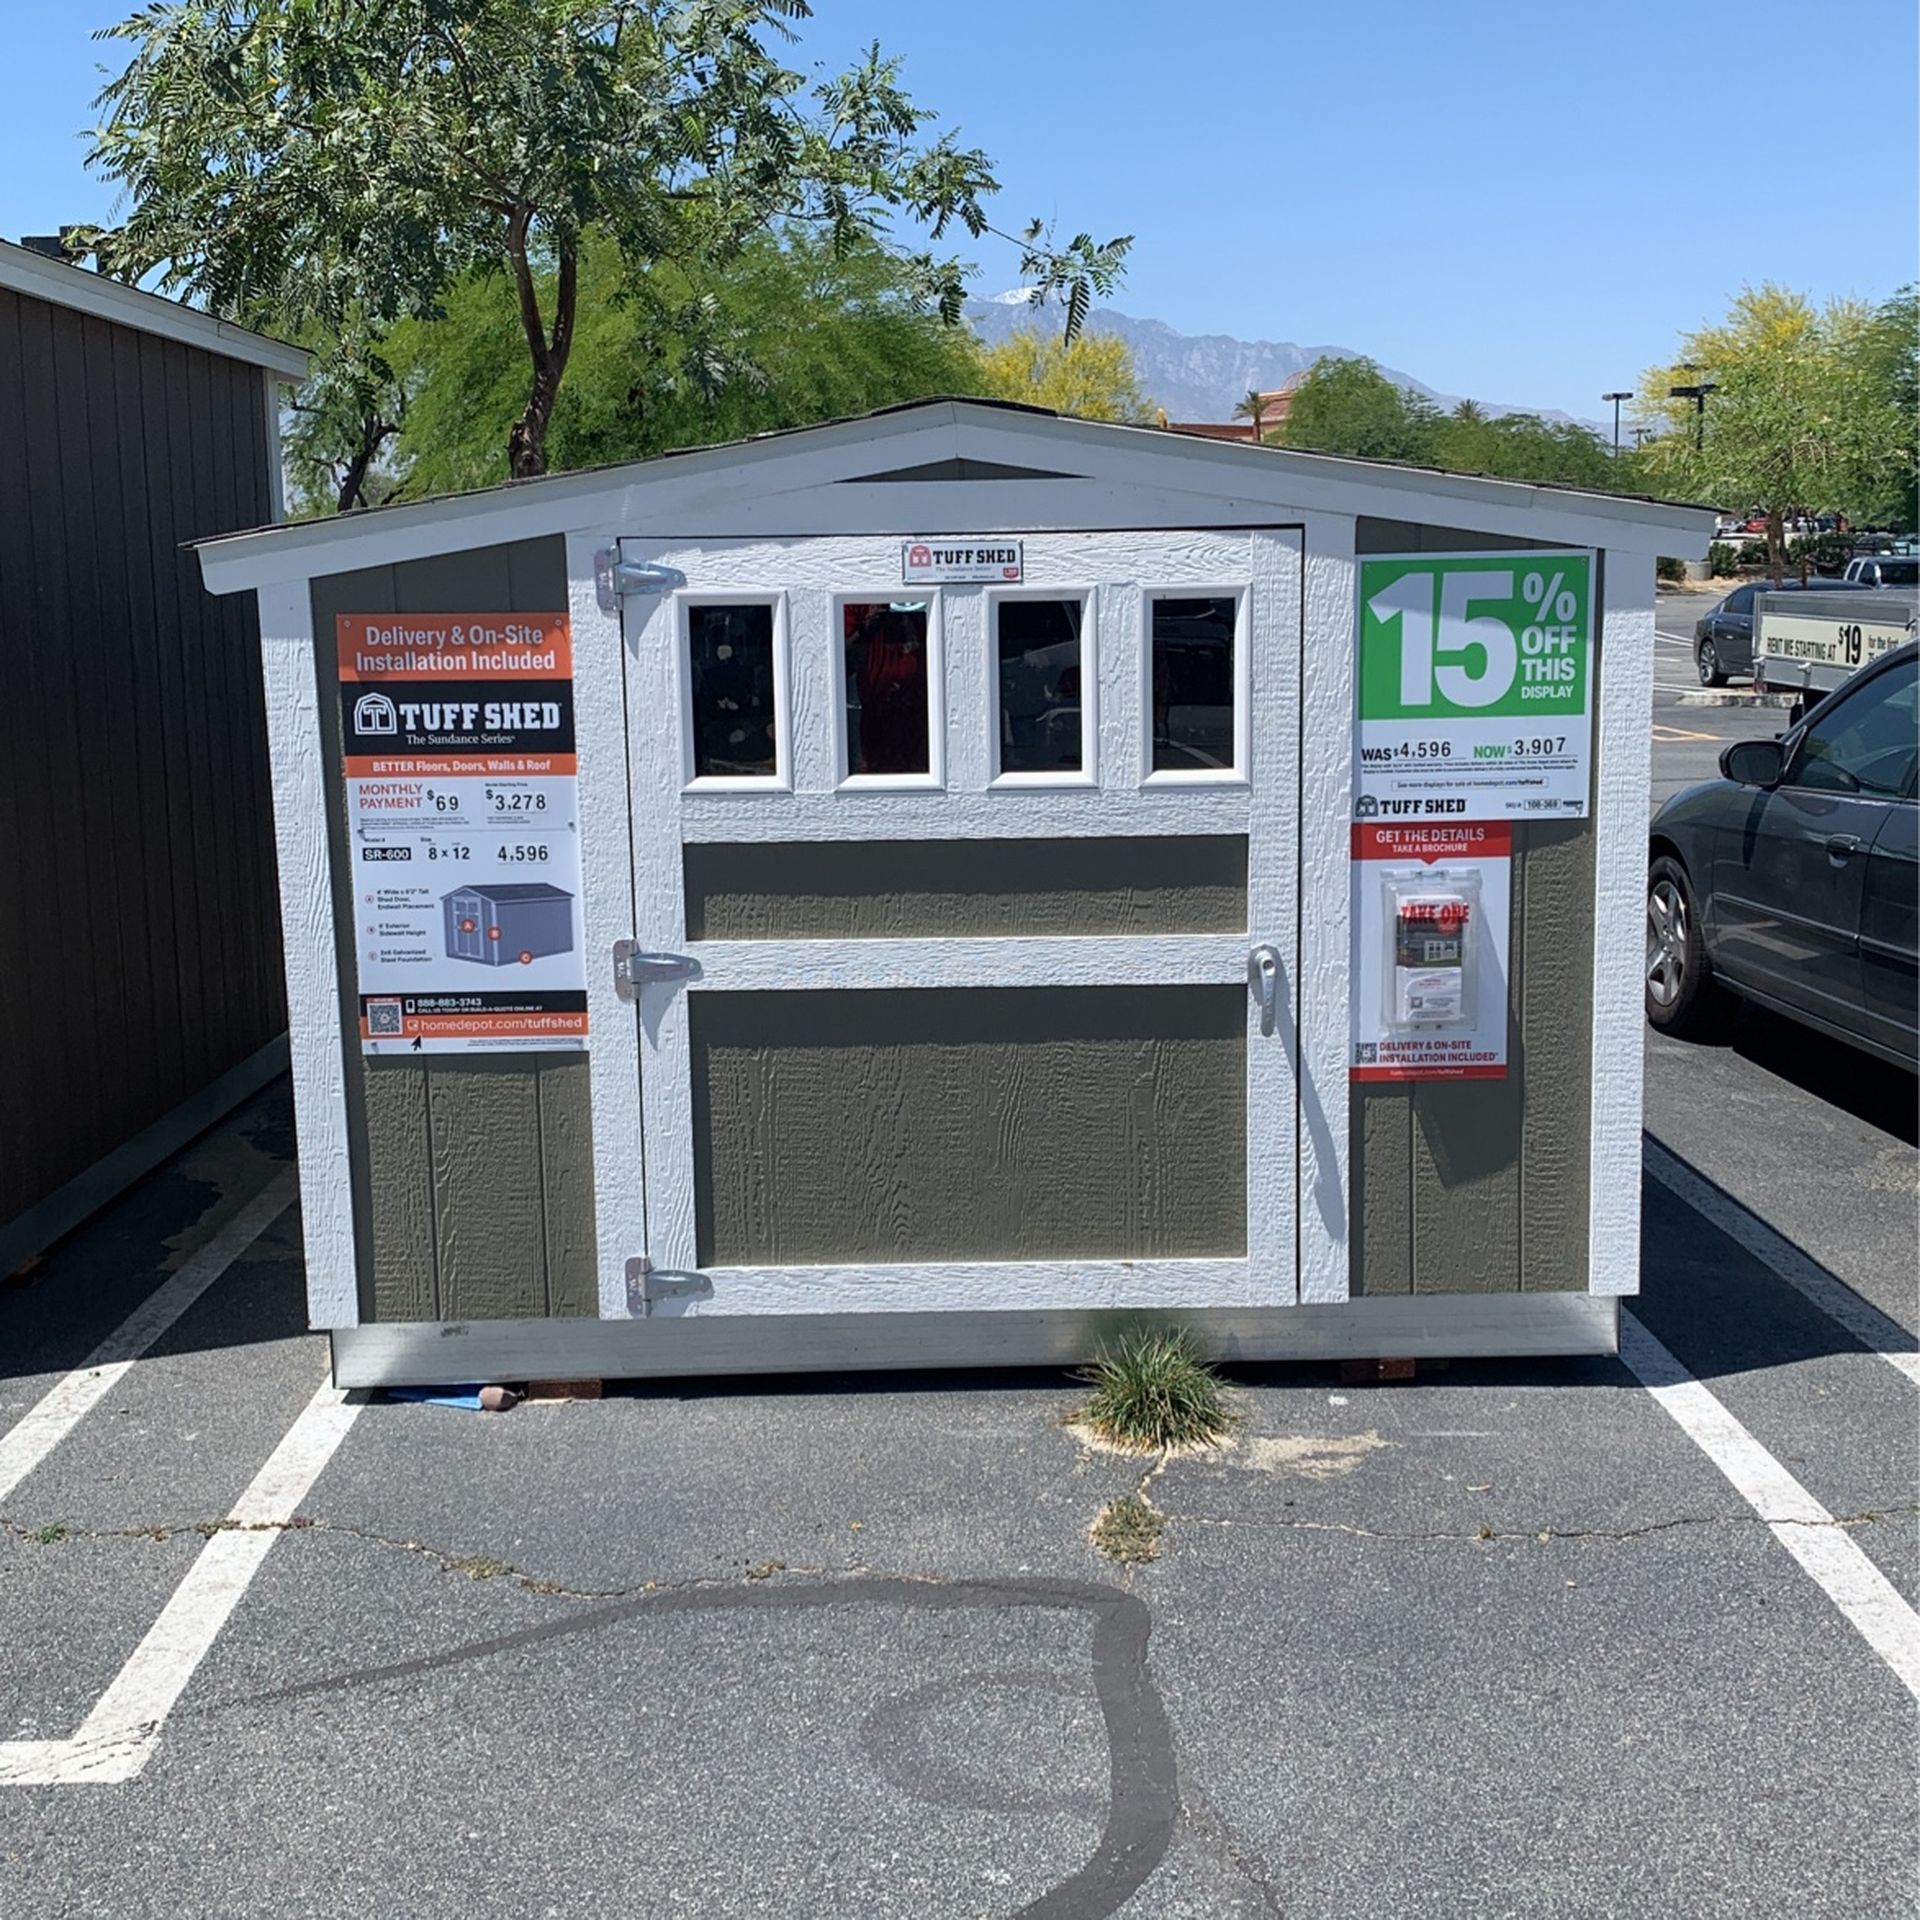 Tuff Shed Sundance SR-600 8x12 Mesa Style Was $4,596 Now $3,907 15% Off Financing Available!